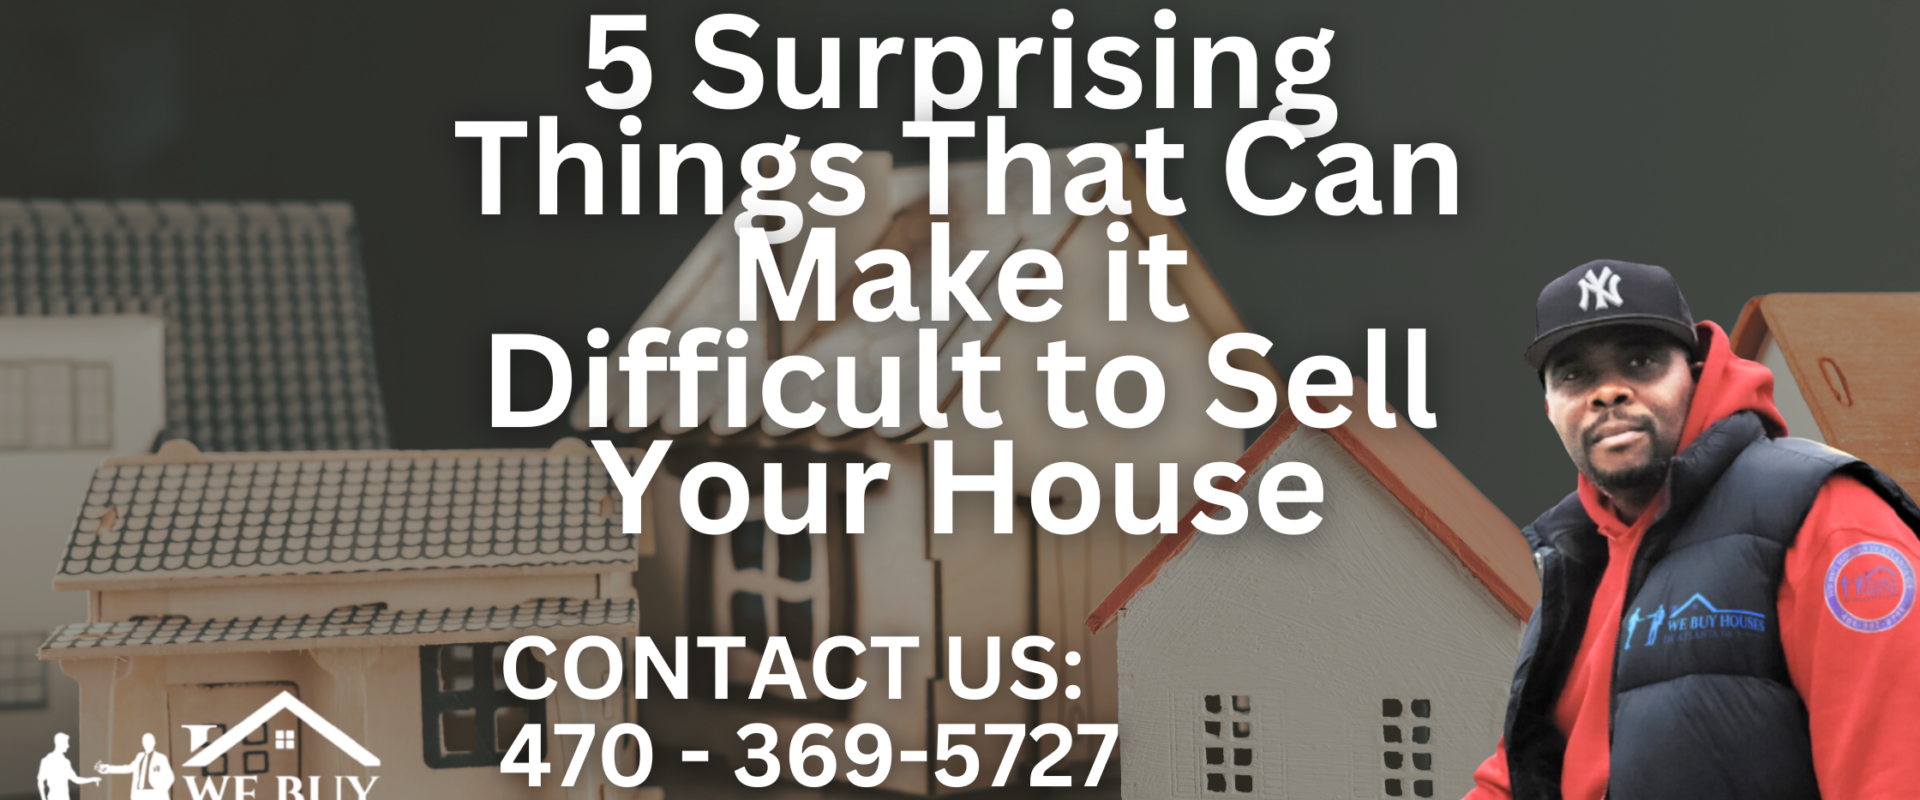 5 Surprising Things That Can Make it Difficult to Sell Your House